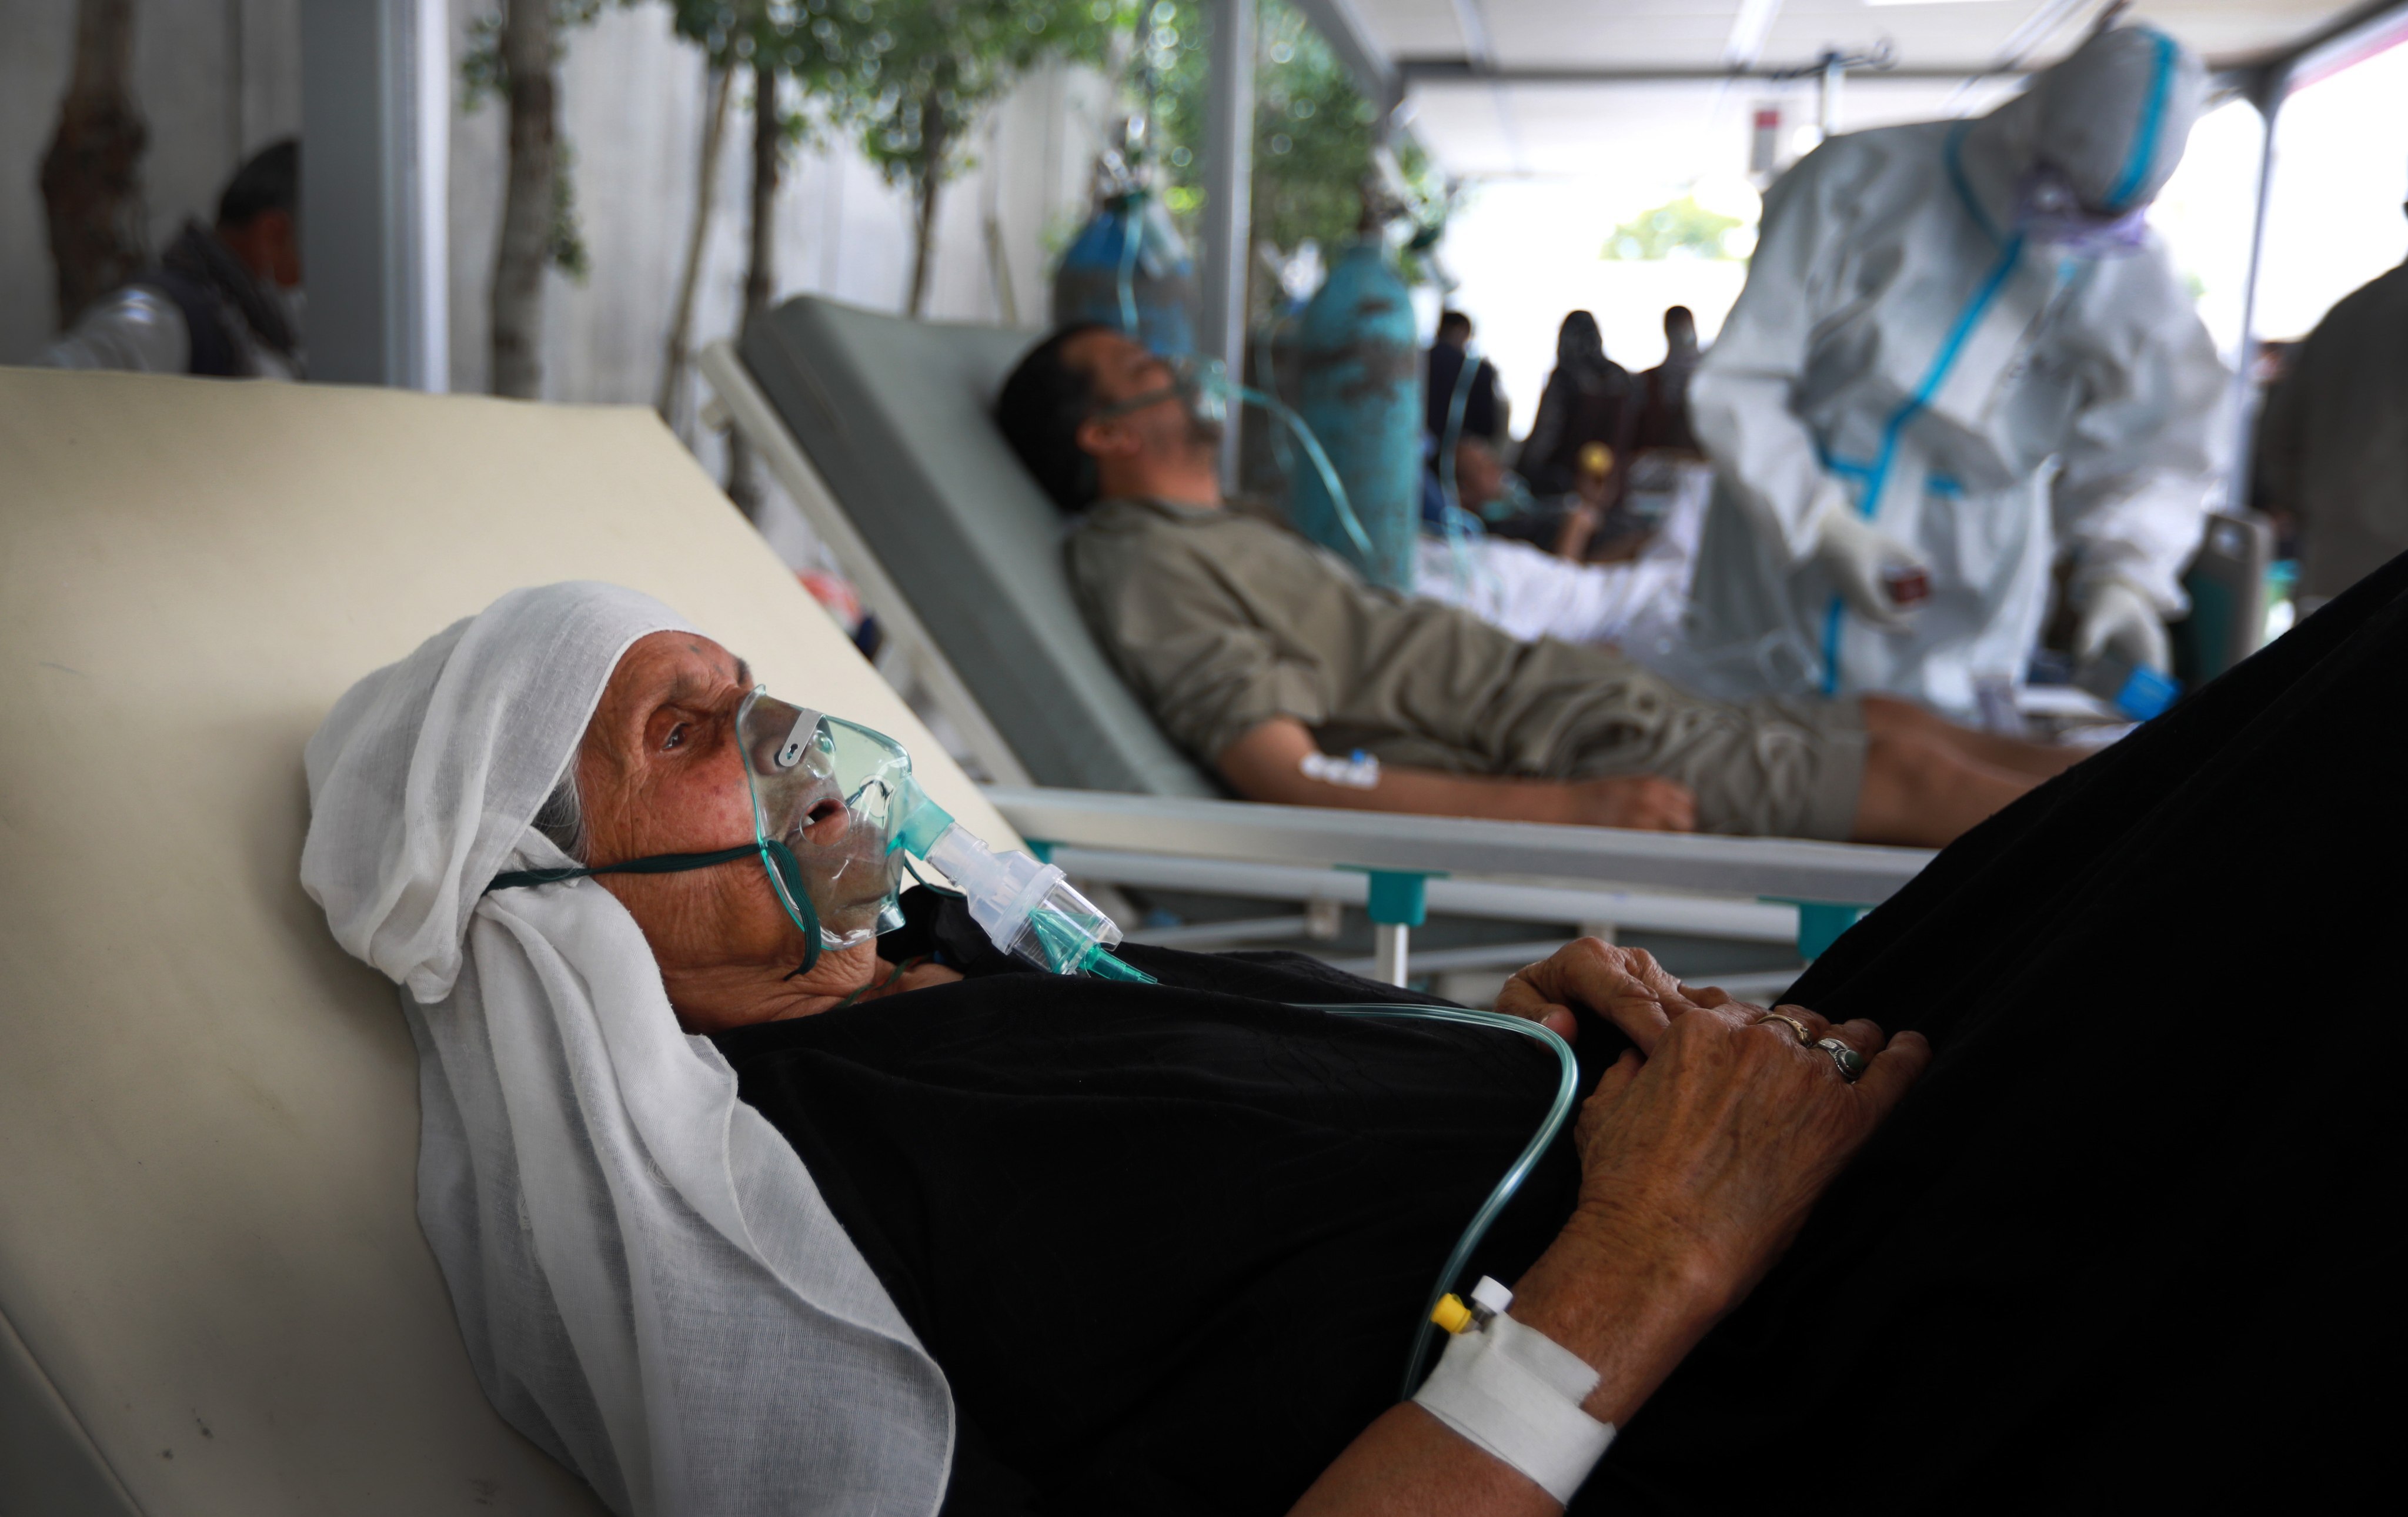 An Afghan woman breathes through an oxygen mask in a special hospital for Covid-19 patients in Kabul on June 9, 2020. Less than 2 per cent of Afghanistan’s population has received at least one vaccine dose, with only 0.5 per cent being fully vaccinated. Photo: EPA-EFE